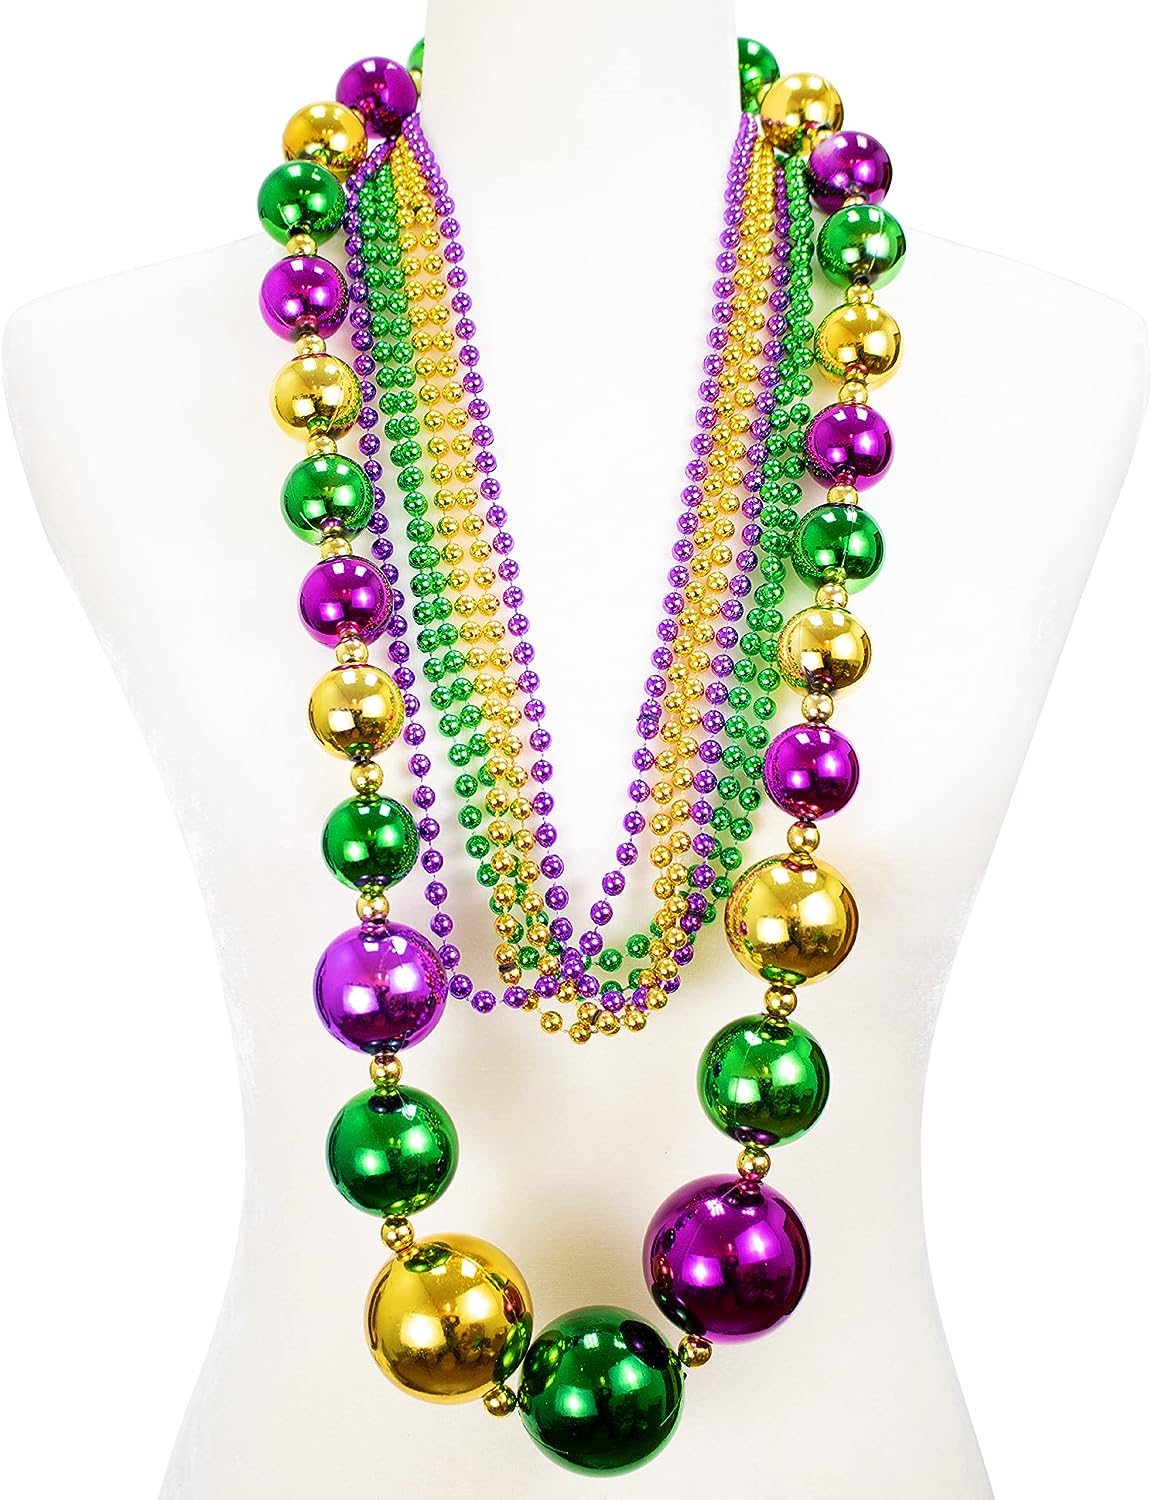 GIFTEXPRESS 6pcs Mardi Gras 46" Jumbo Ball Bead Necklaces and 33” 7mm Assorted Metallic Color Beaded Necklaces